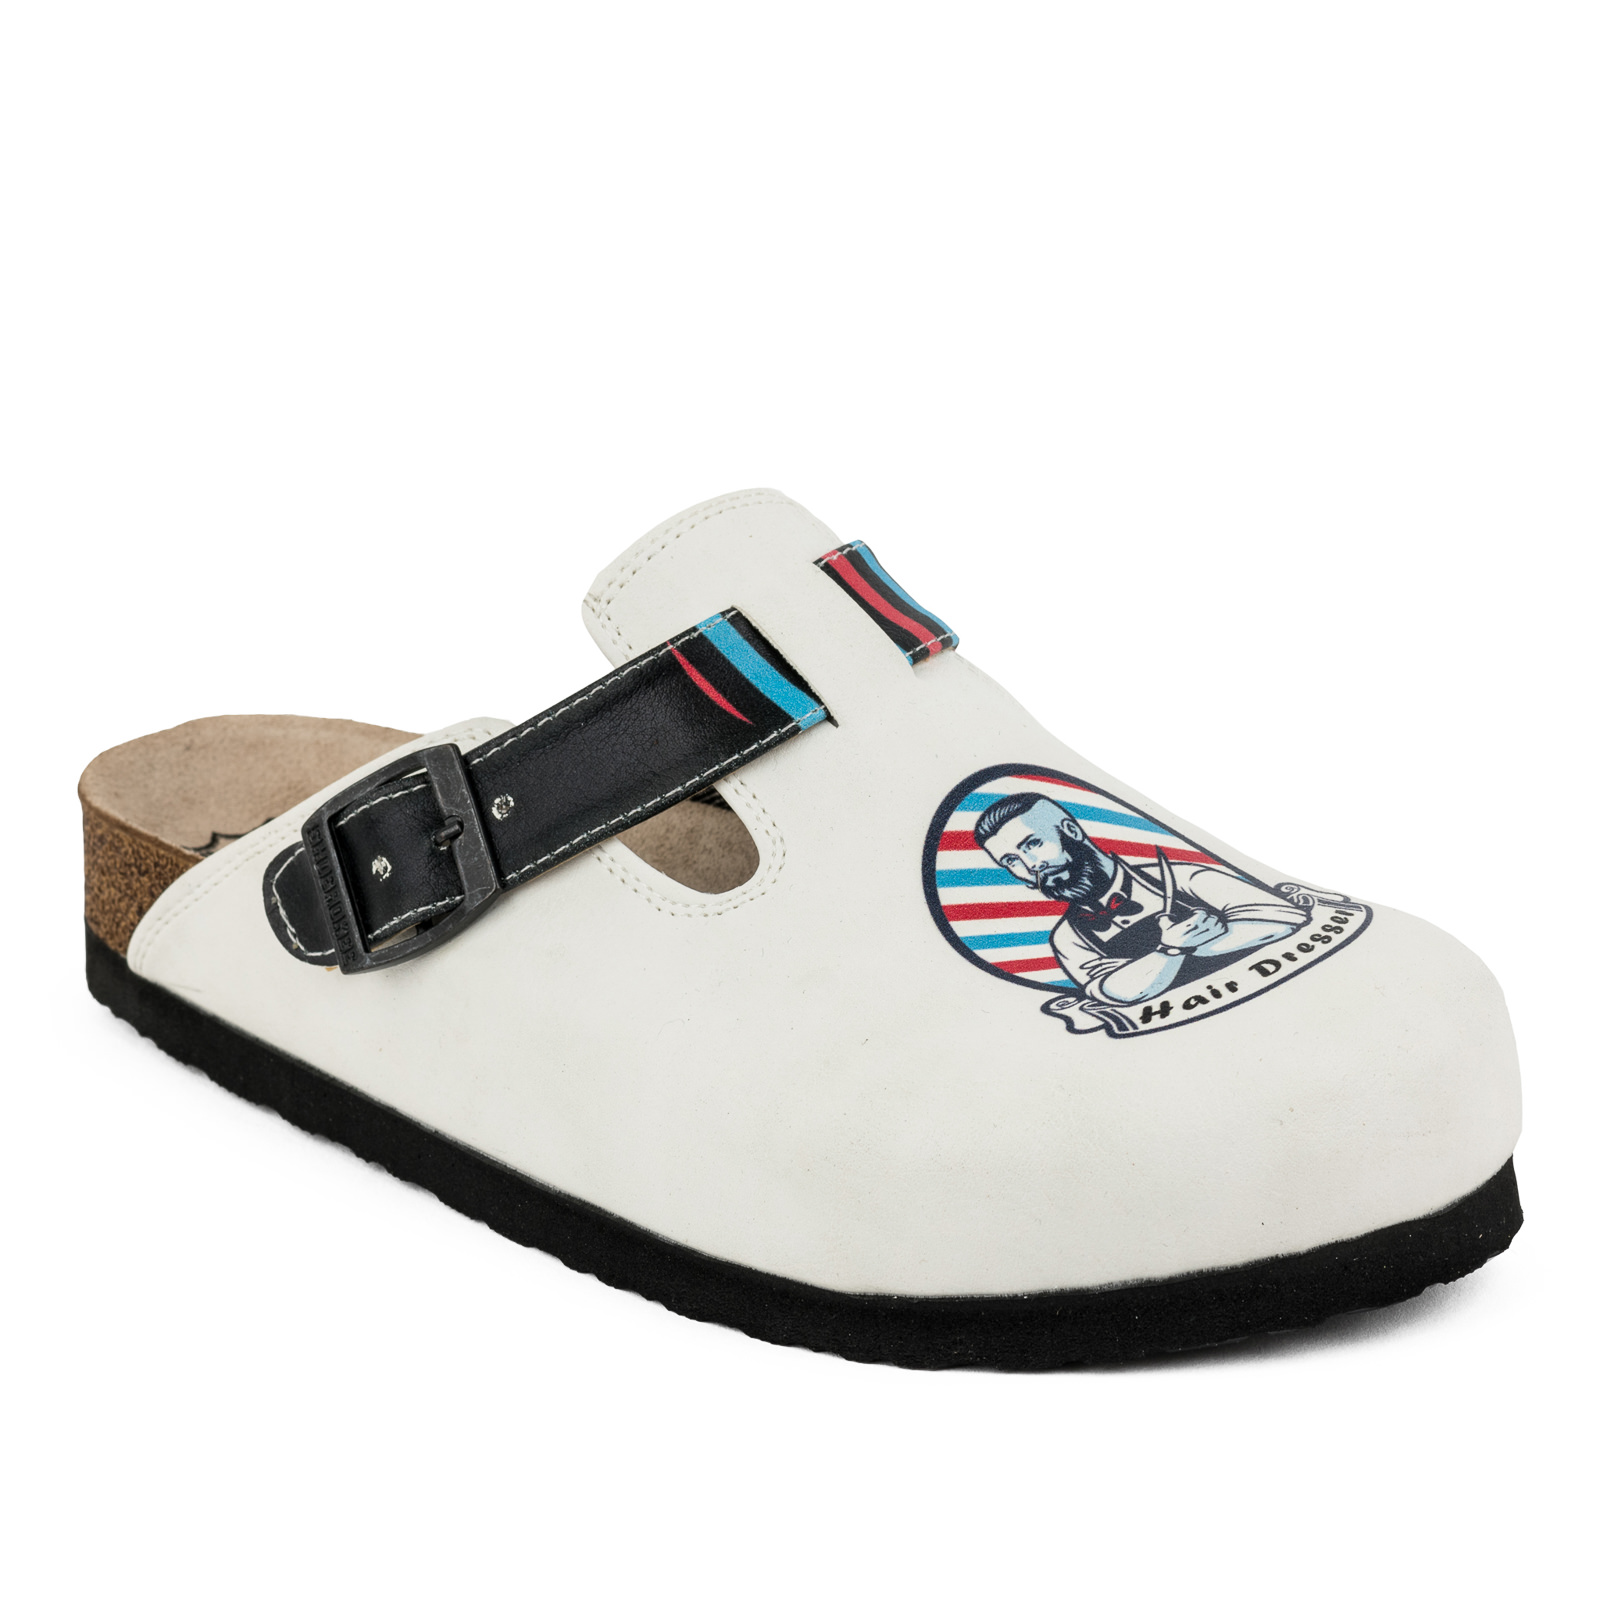 Patterned women clogs A092 - HAIRDRESSER - WHITE